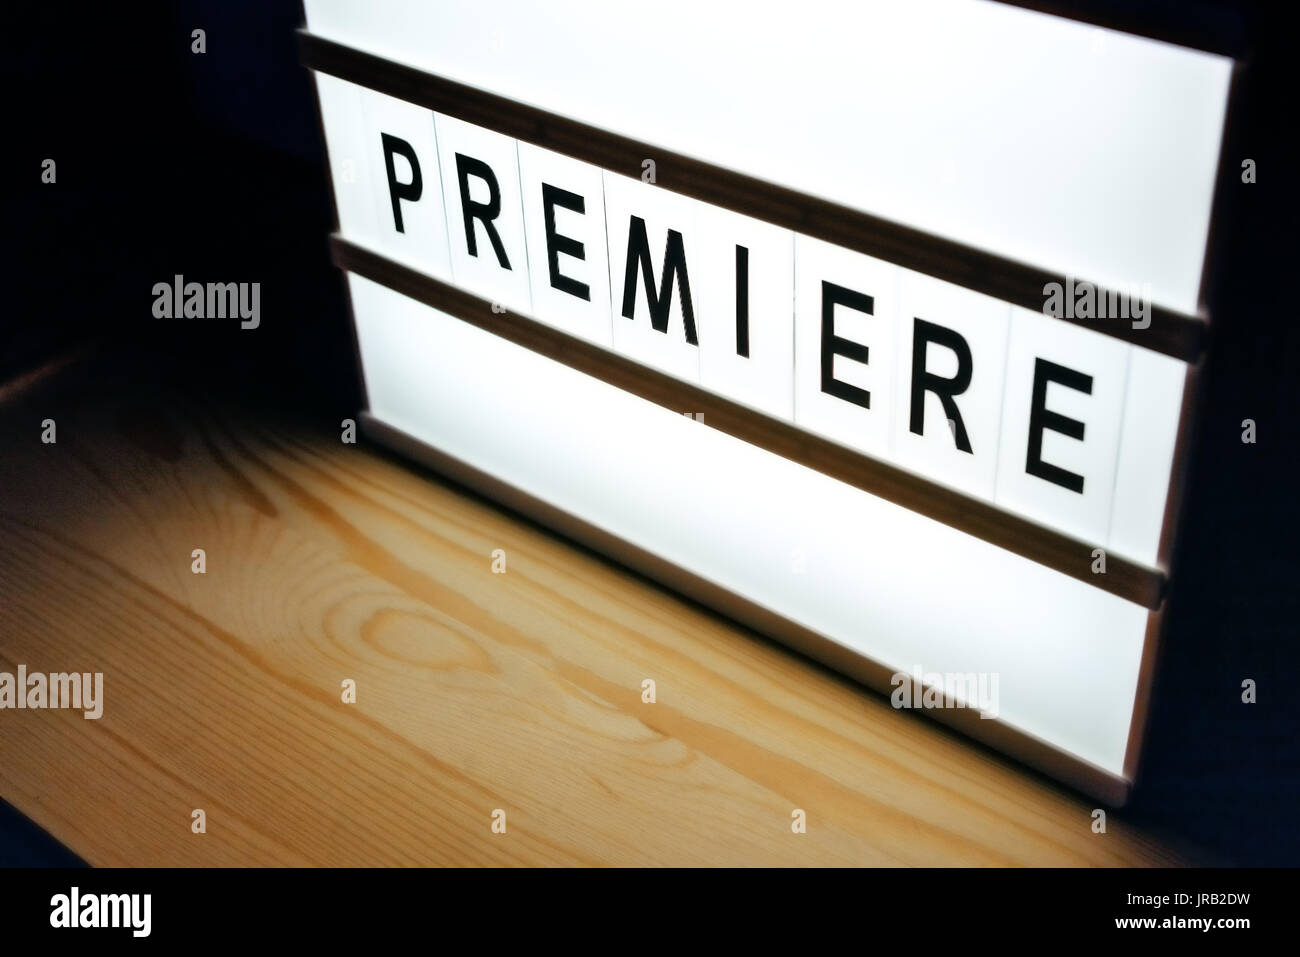 Vintage illuminated lightbox Premiere sign in cinema movie or for radio and television live audience broadcast Stock Photo